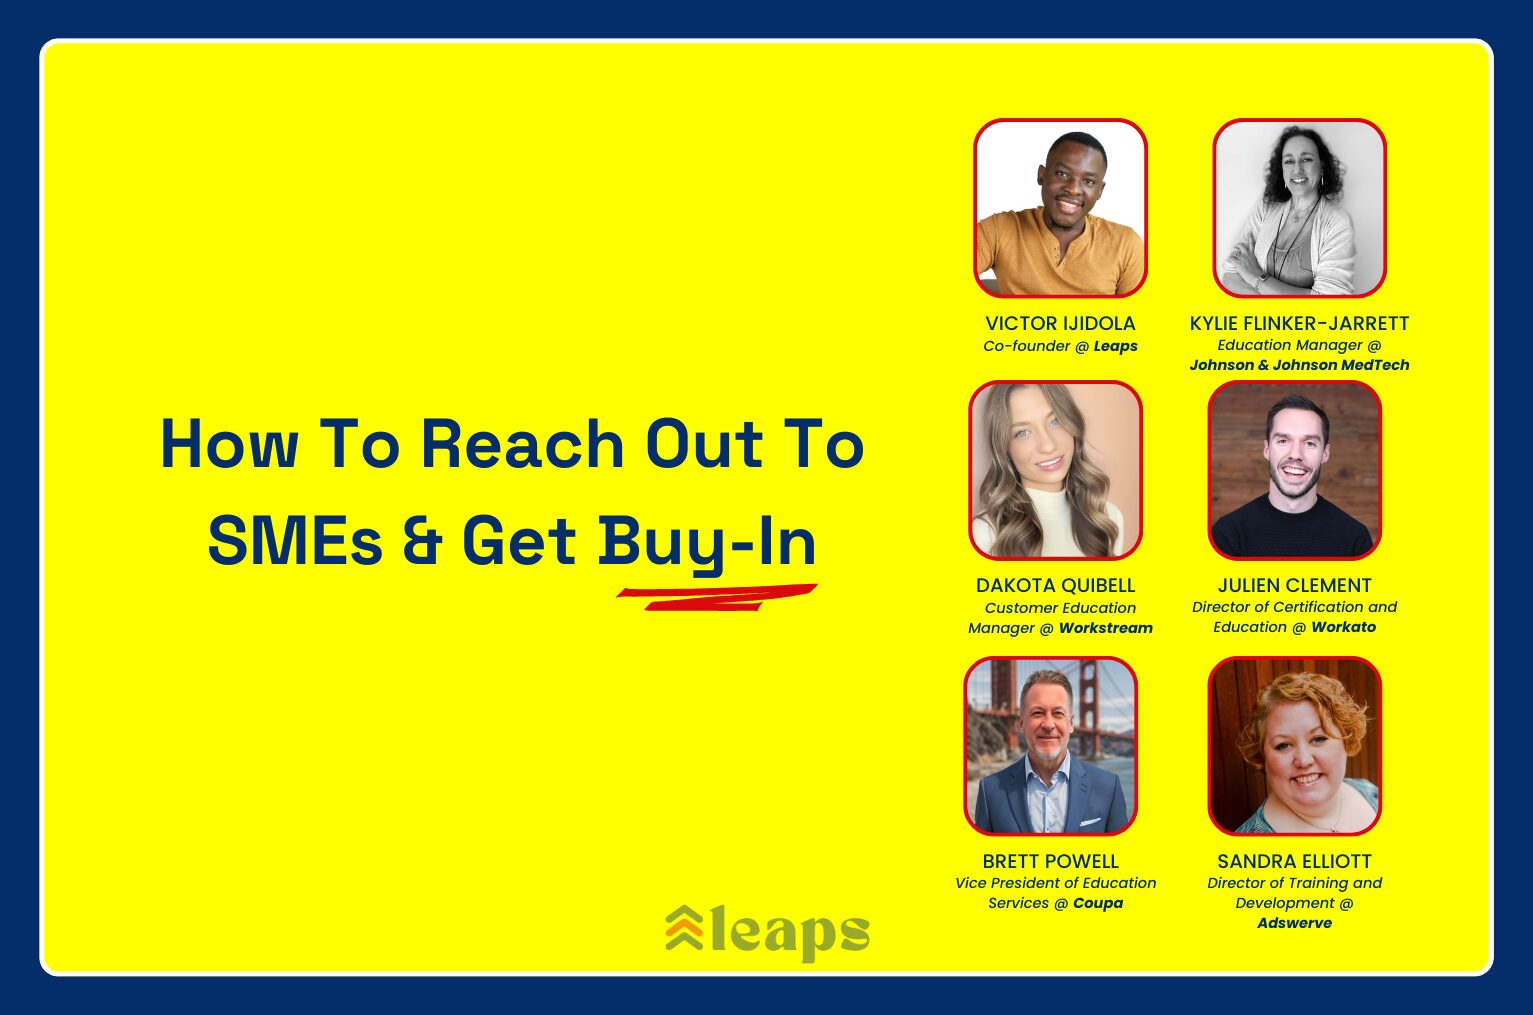 How To Reach Out To SMEs & Get Buy-In